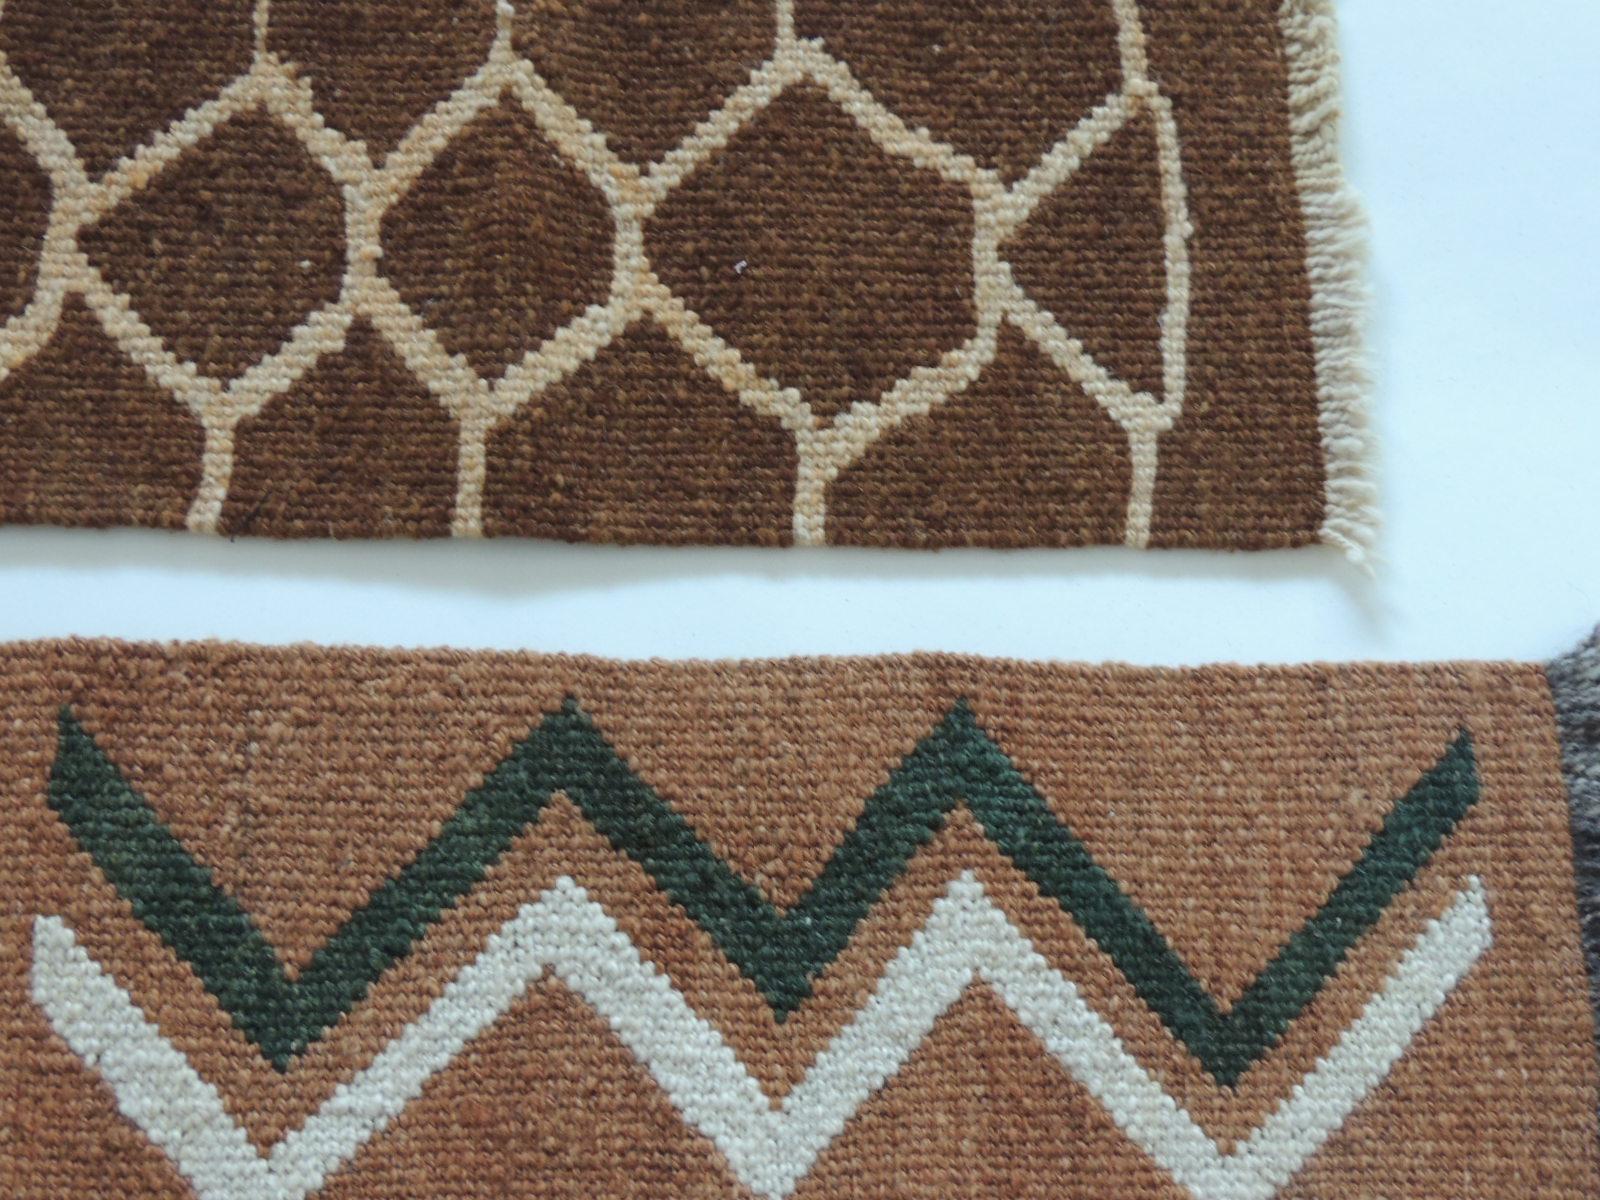 Vintage camel and brown woven rug samples.
Woven abstract pattern and fringes.
Ideal to frame or make them in to pillows.
Sizes: 
Top: 7.5